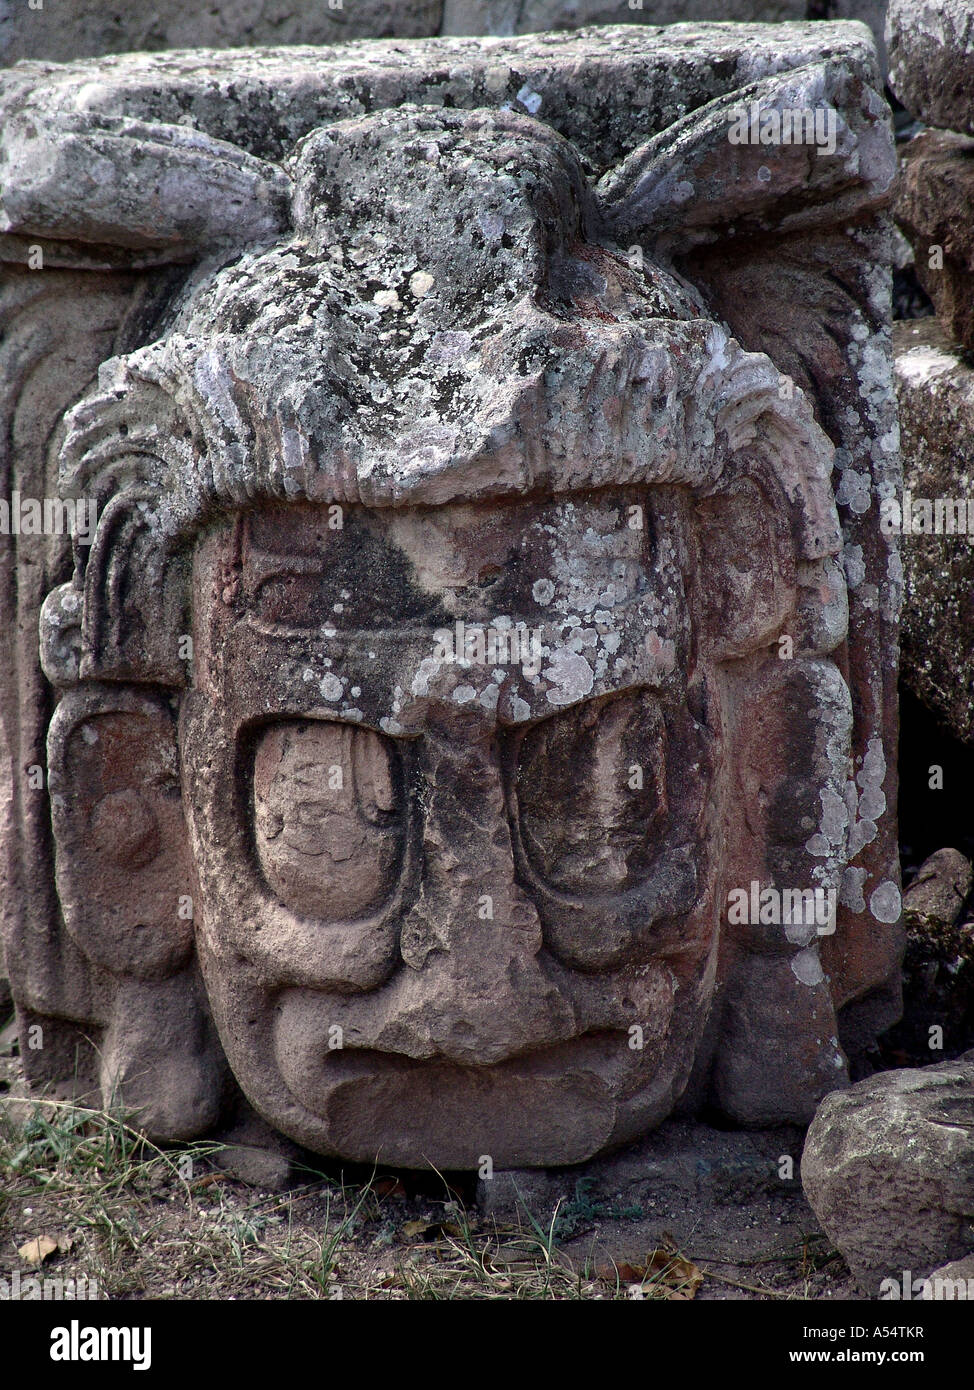 Painet ip1966 honduras stone head copan mayan ruins country developing nation less economically developed culture emerging Stock Photo